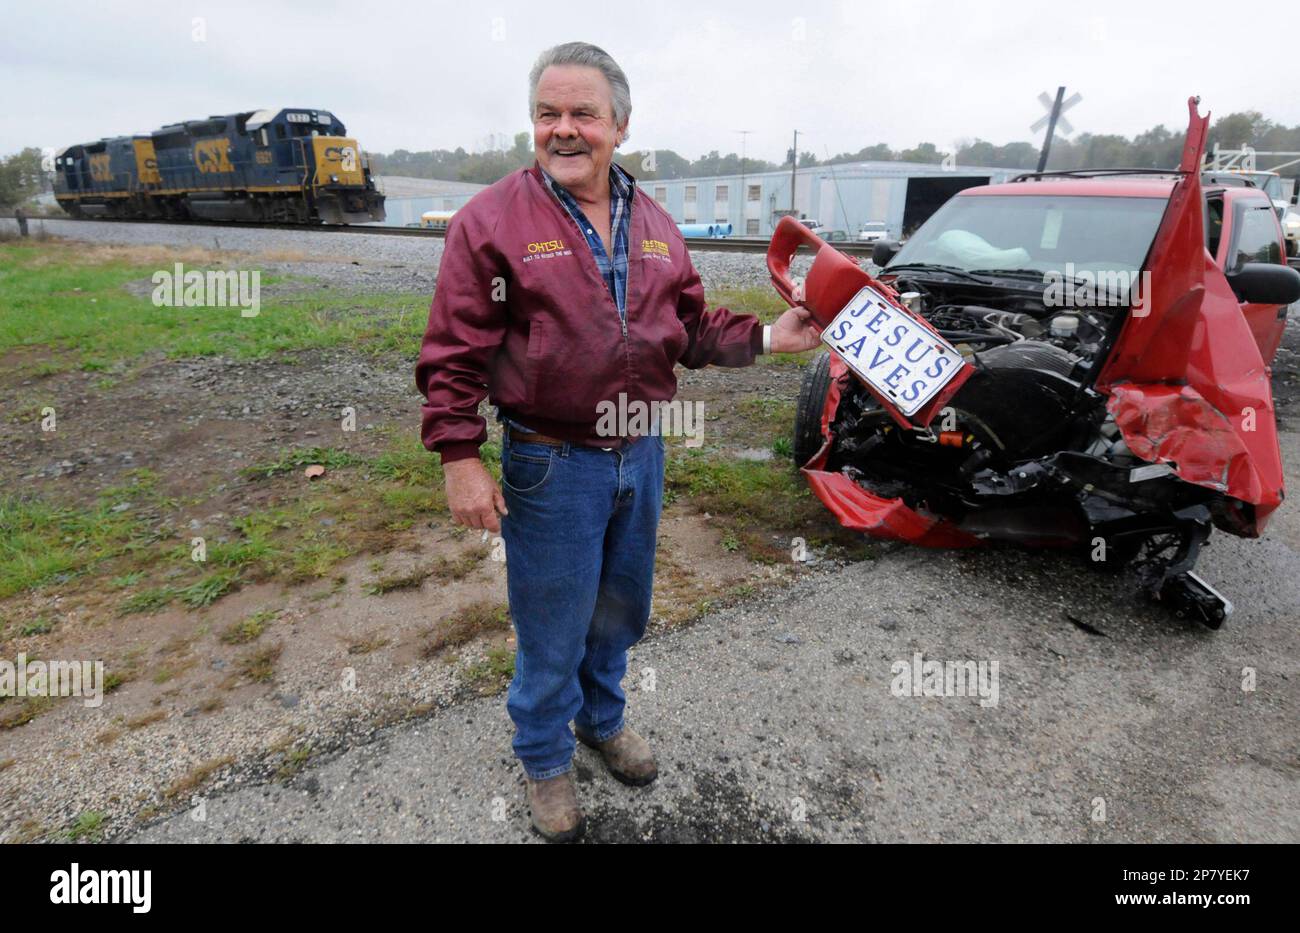 https://c8.alamy.com/comp/2P7YEK7/steve-bumpus-of-hadley-ky-looks-at-the-jesus-saves-license-plate-he-found-25-yards-from-his-suv-after-he-survived-a-collision-with-a-train-friday-oct-16-2009-at-tobacco-road-in-bowling-green-ky-bumpus-who-was-uninjured-said-he-did-not-see-the-train-coming-i-really-was-saved-said-bumpus-of-his-ordealap-photodaily-news-joe-imel-2P7YEK7.jpg